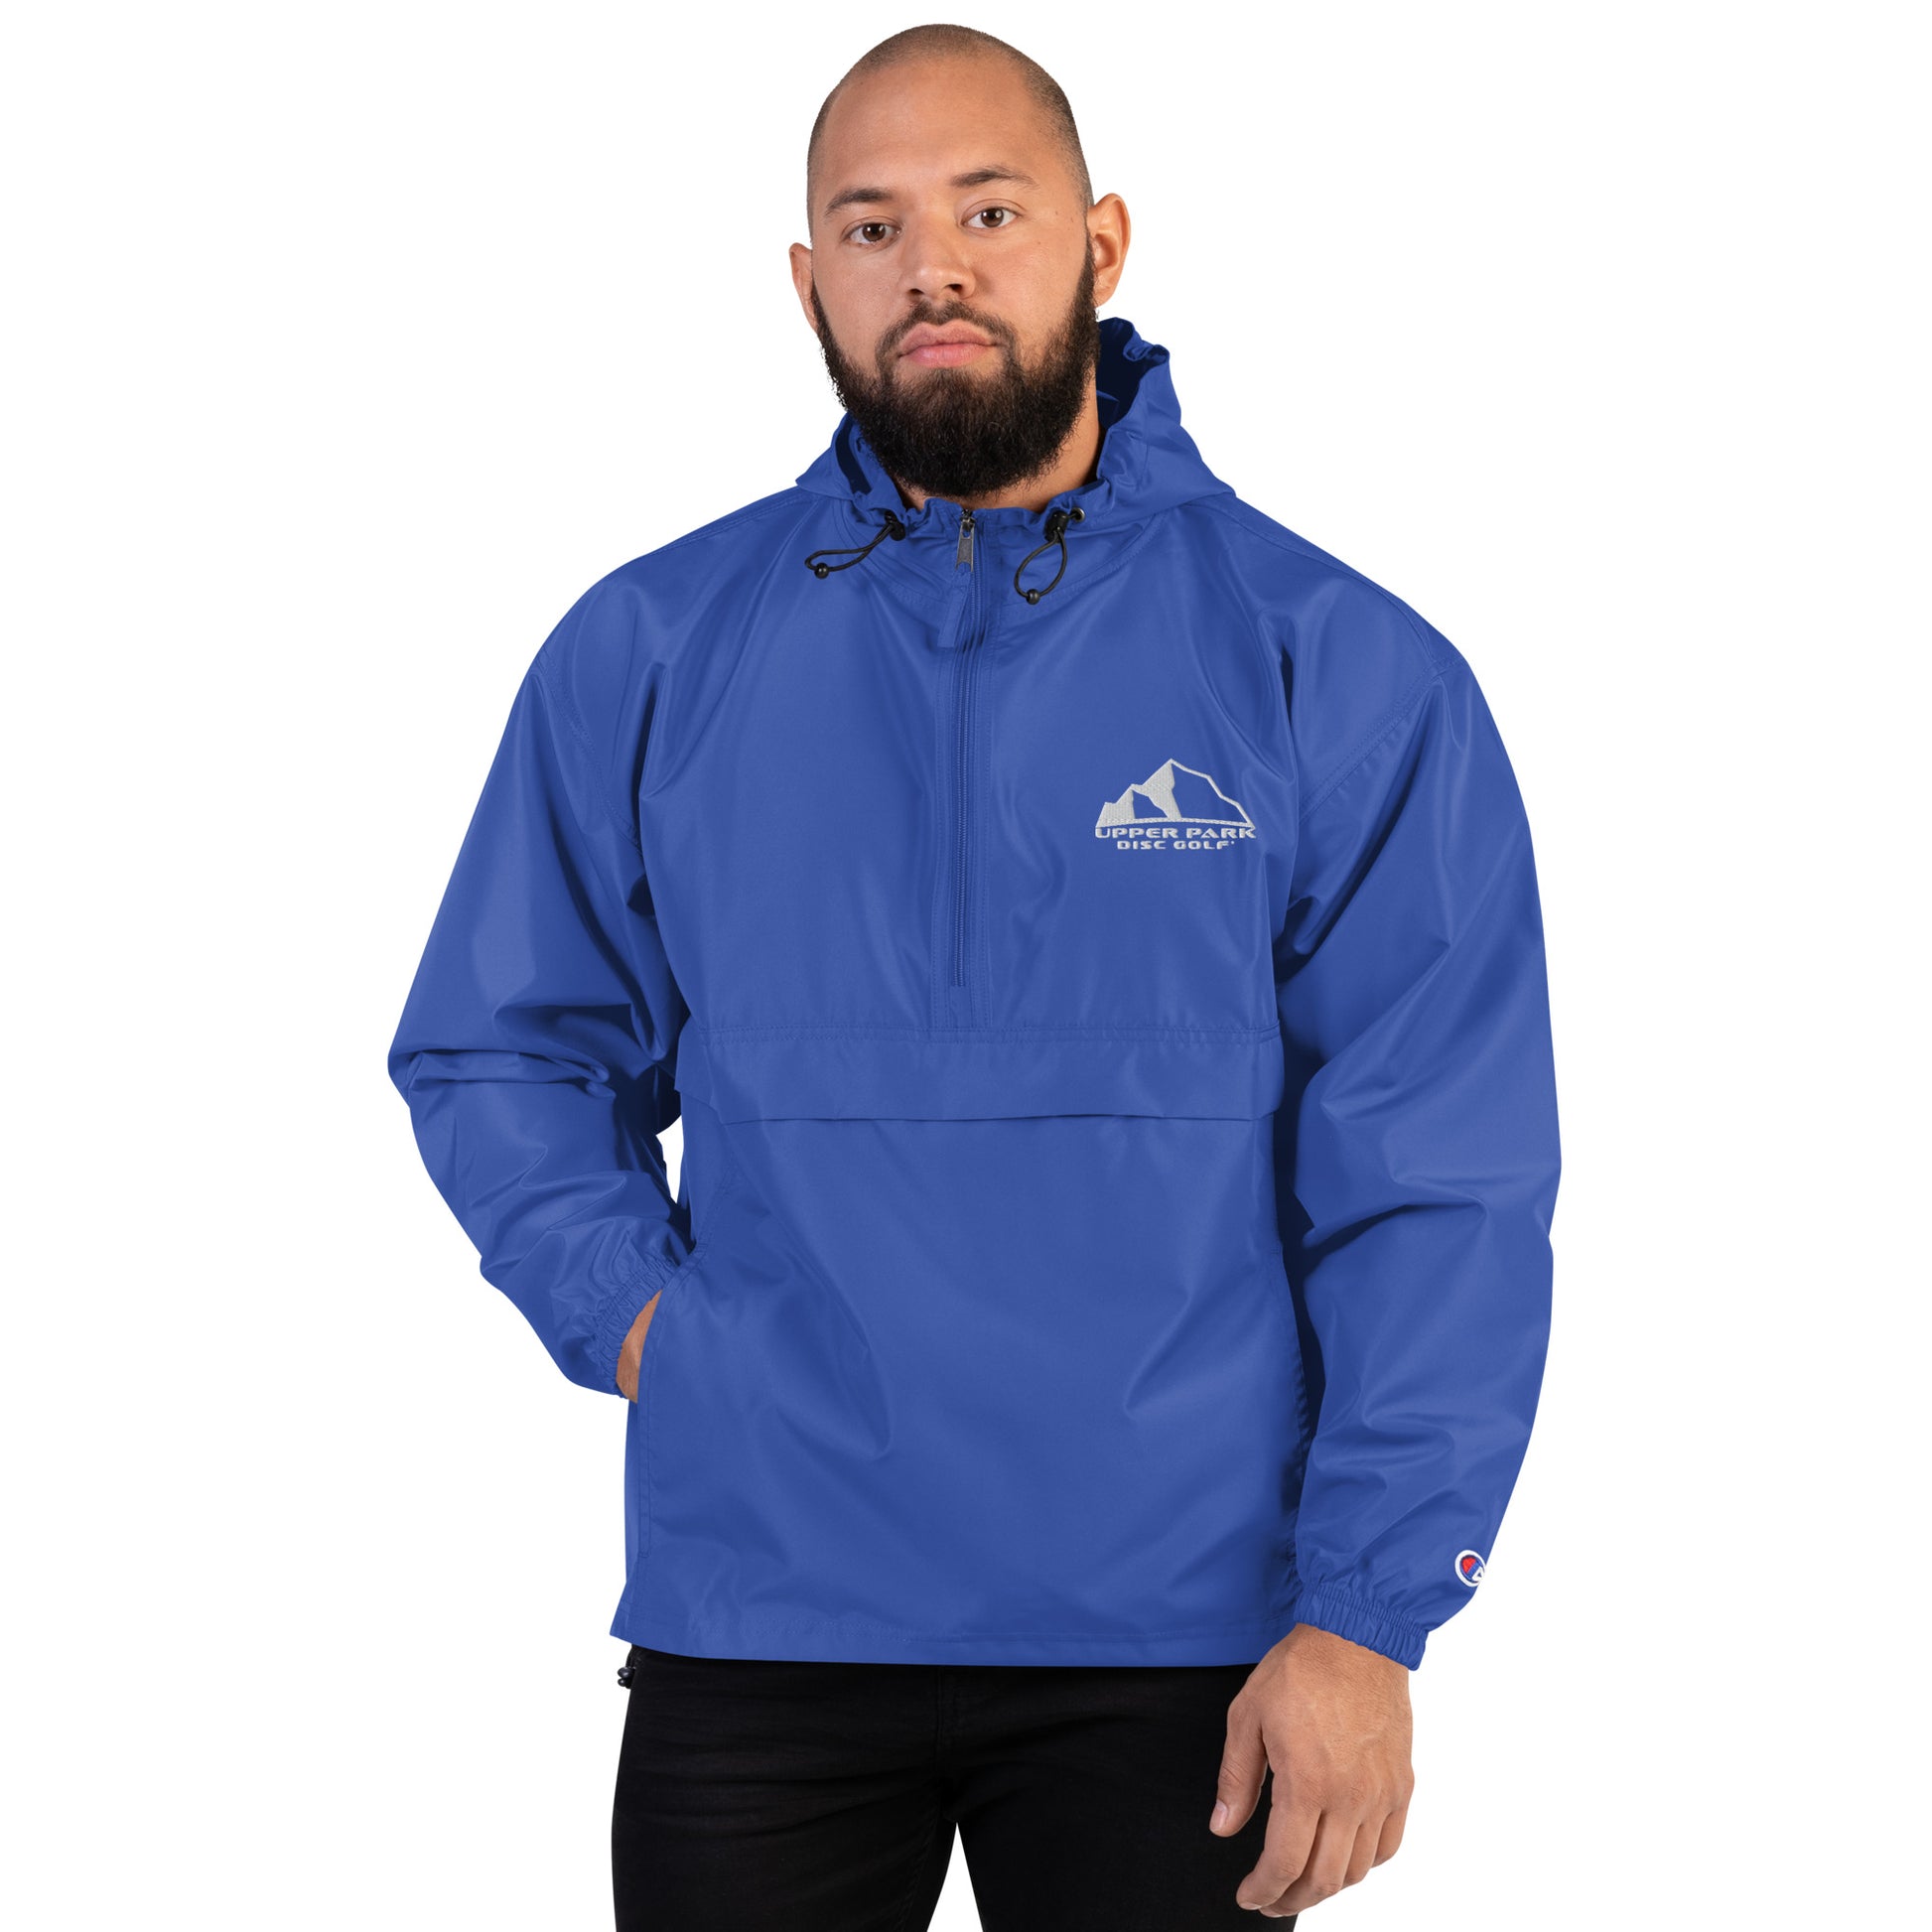 Embroidered Champion Packable Jacket with Upper Park Disc Golf® logo blue